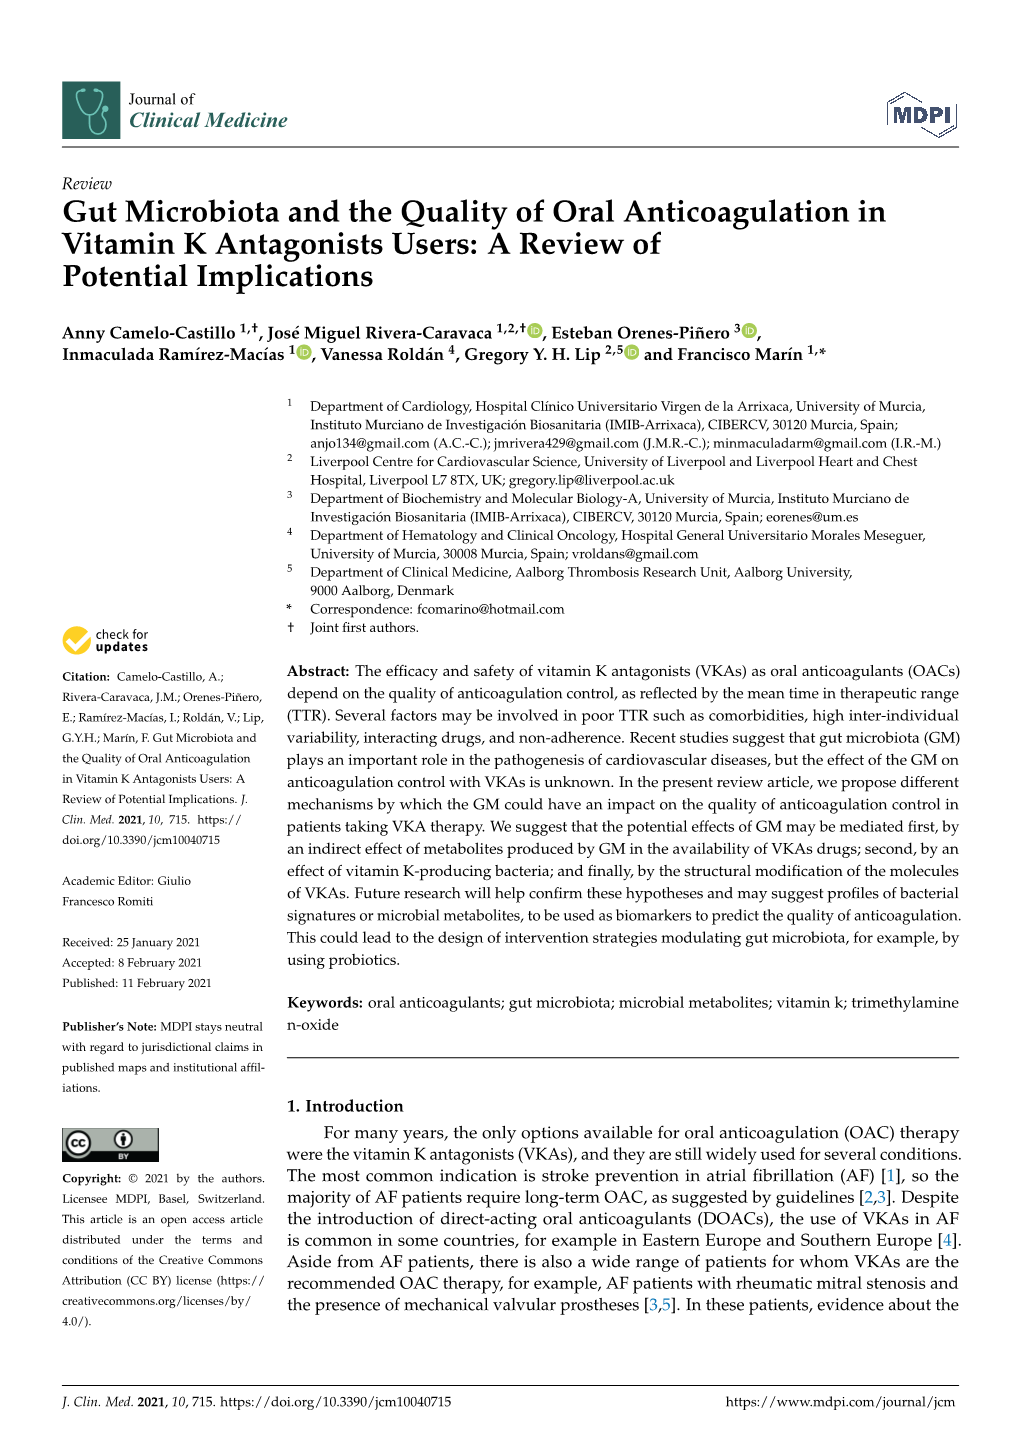 Gut Microbiota and the Quality of Oral Anticoagulation in Vitamin K Antagonists Users: a Review of Potential Implications